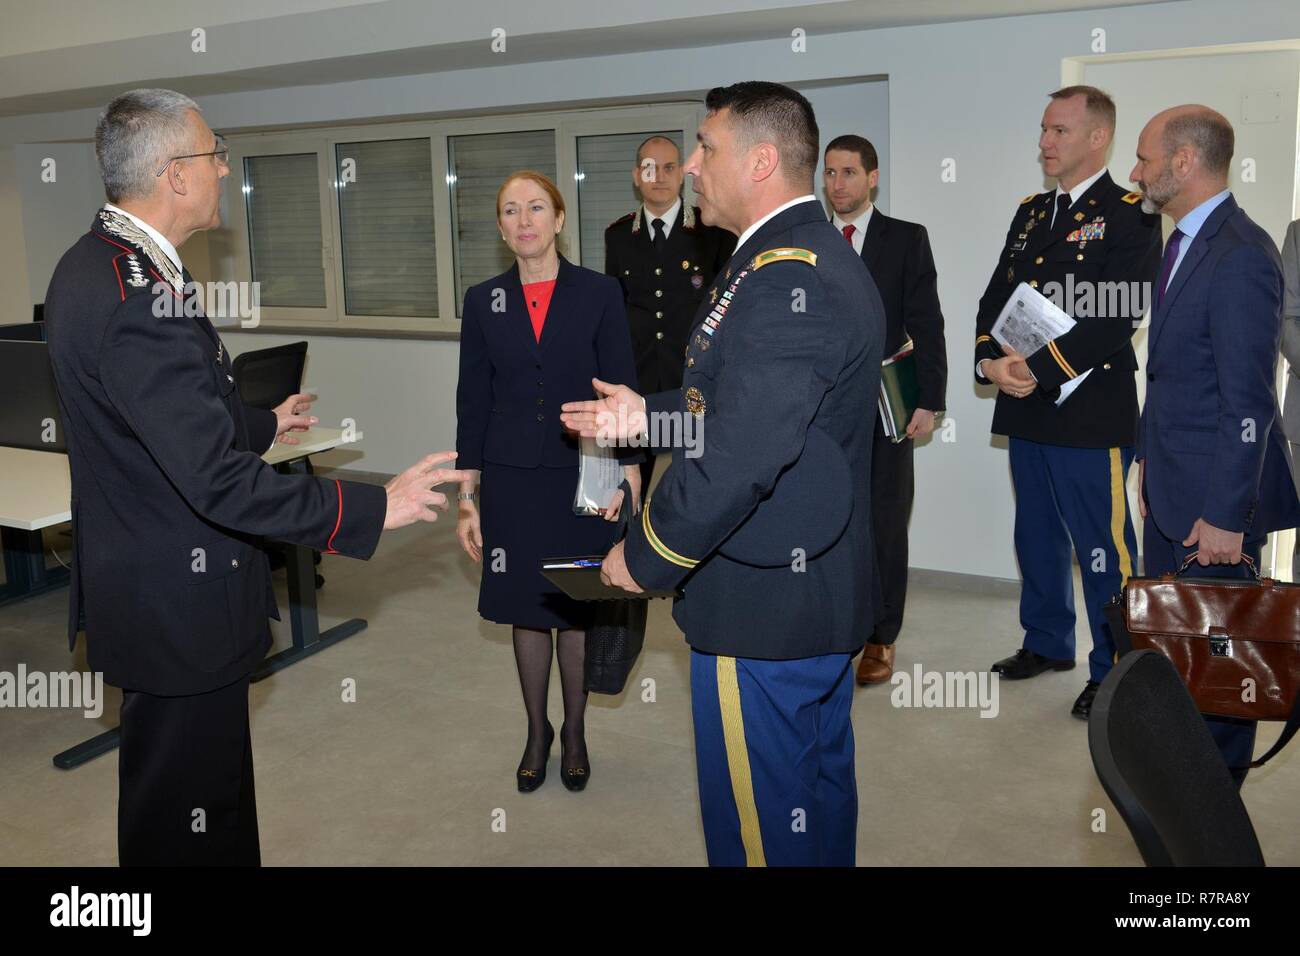 Ms. Kelly Degnan, Charge’ d’Affaires ad interim U.S. Embassy & Consulates Italy, during visit at Center of Excellence for Stability Police Units (CoESPU) Vicenza, Italy, Mar. 30, 2017. Stock Photo